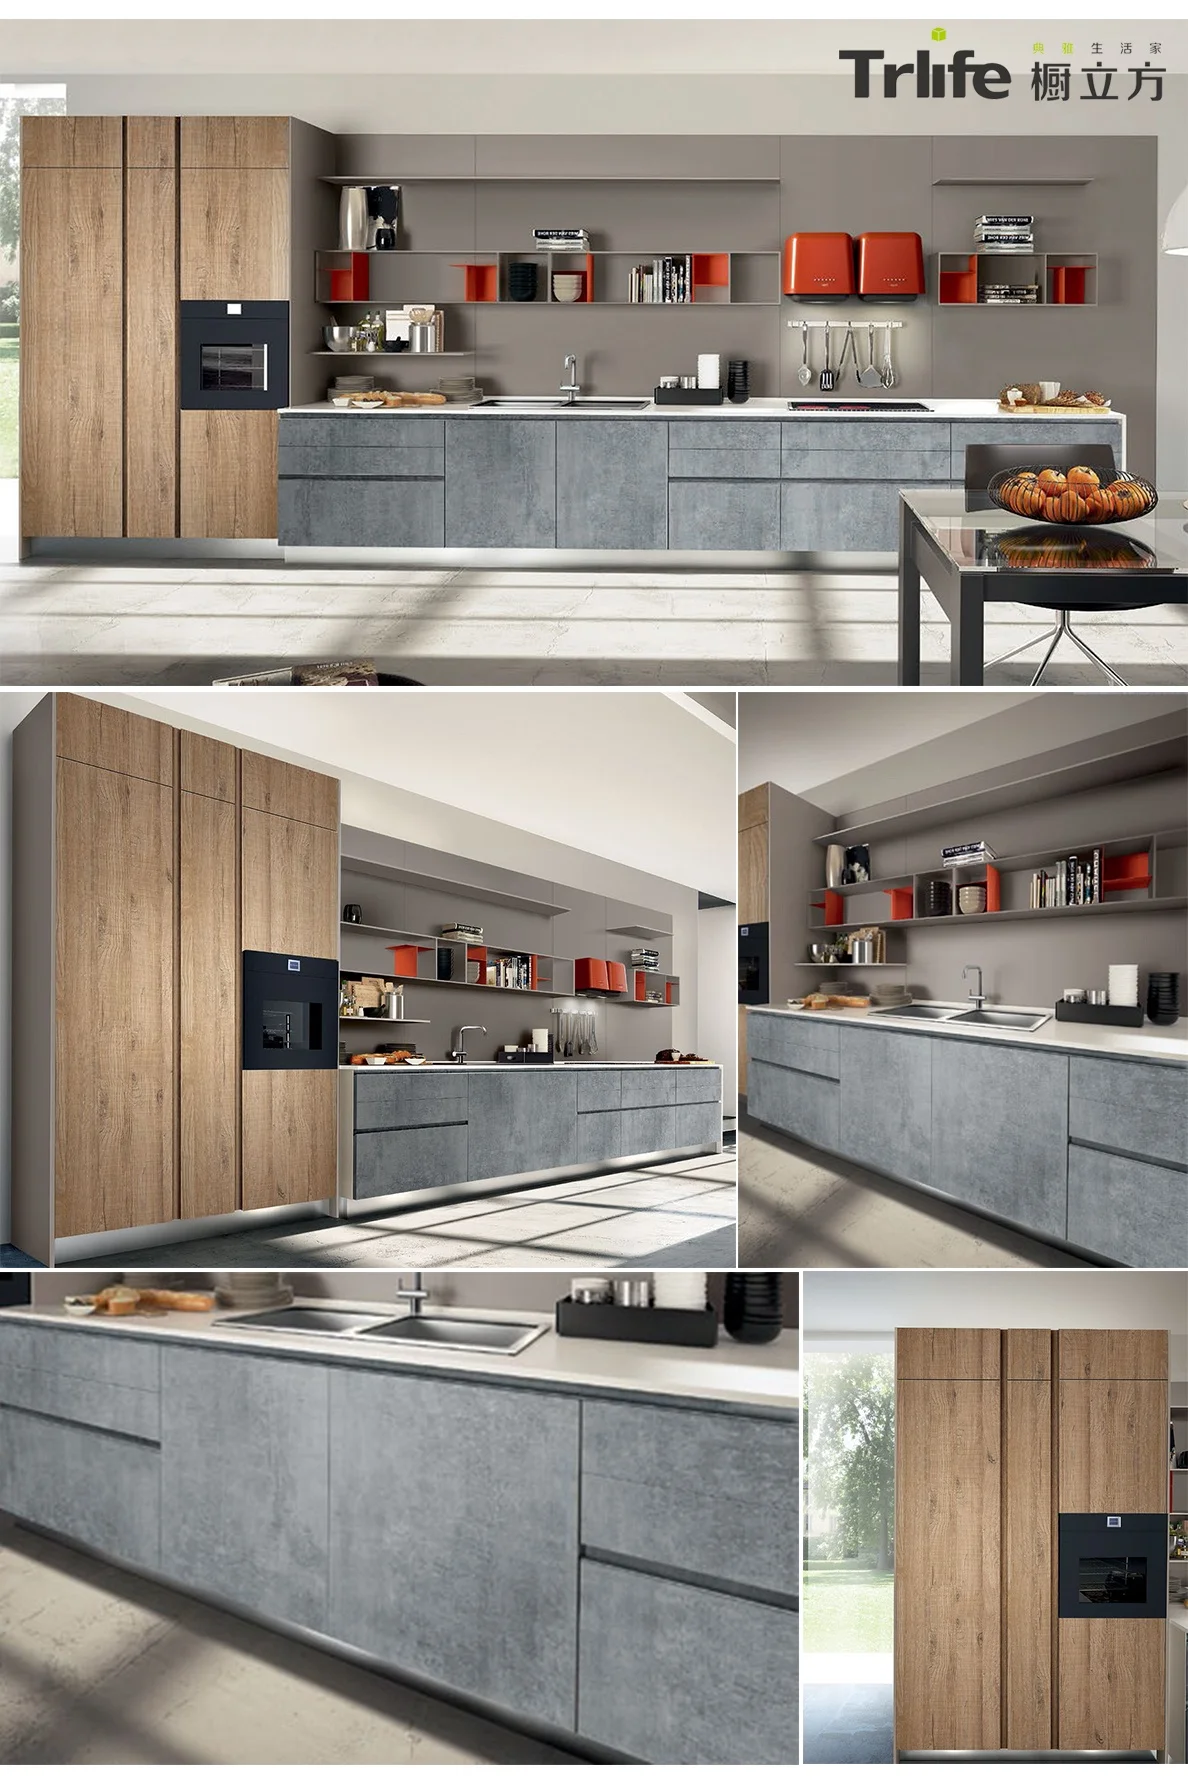 China Trlife prefab new model commercial Multi-layer plywood mdf laminate kitchen modular hanging cabinet